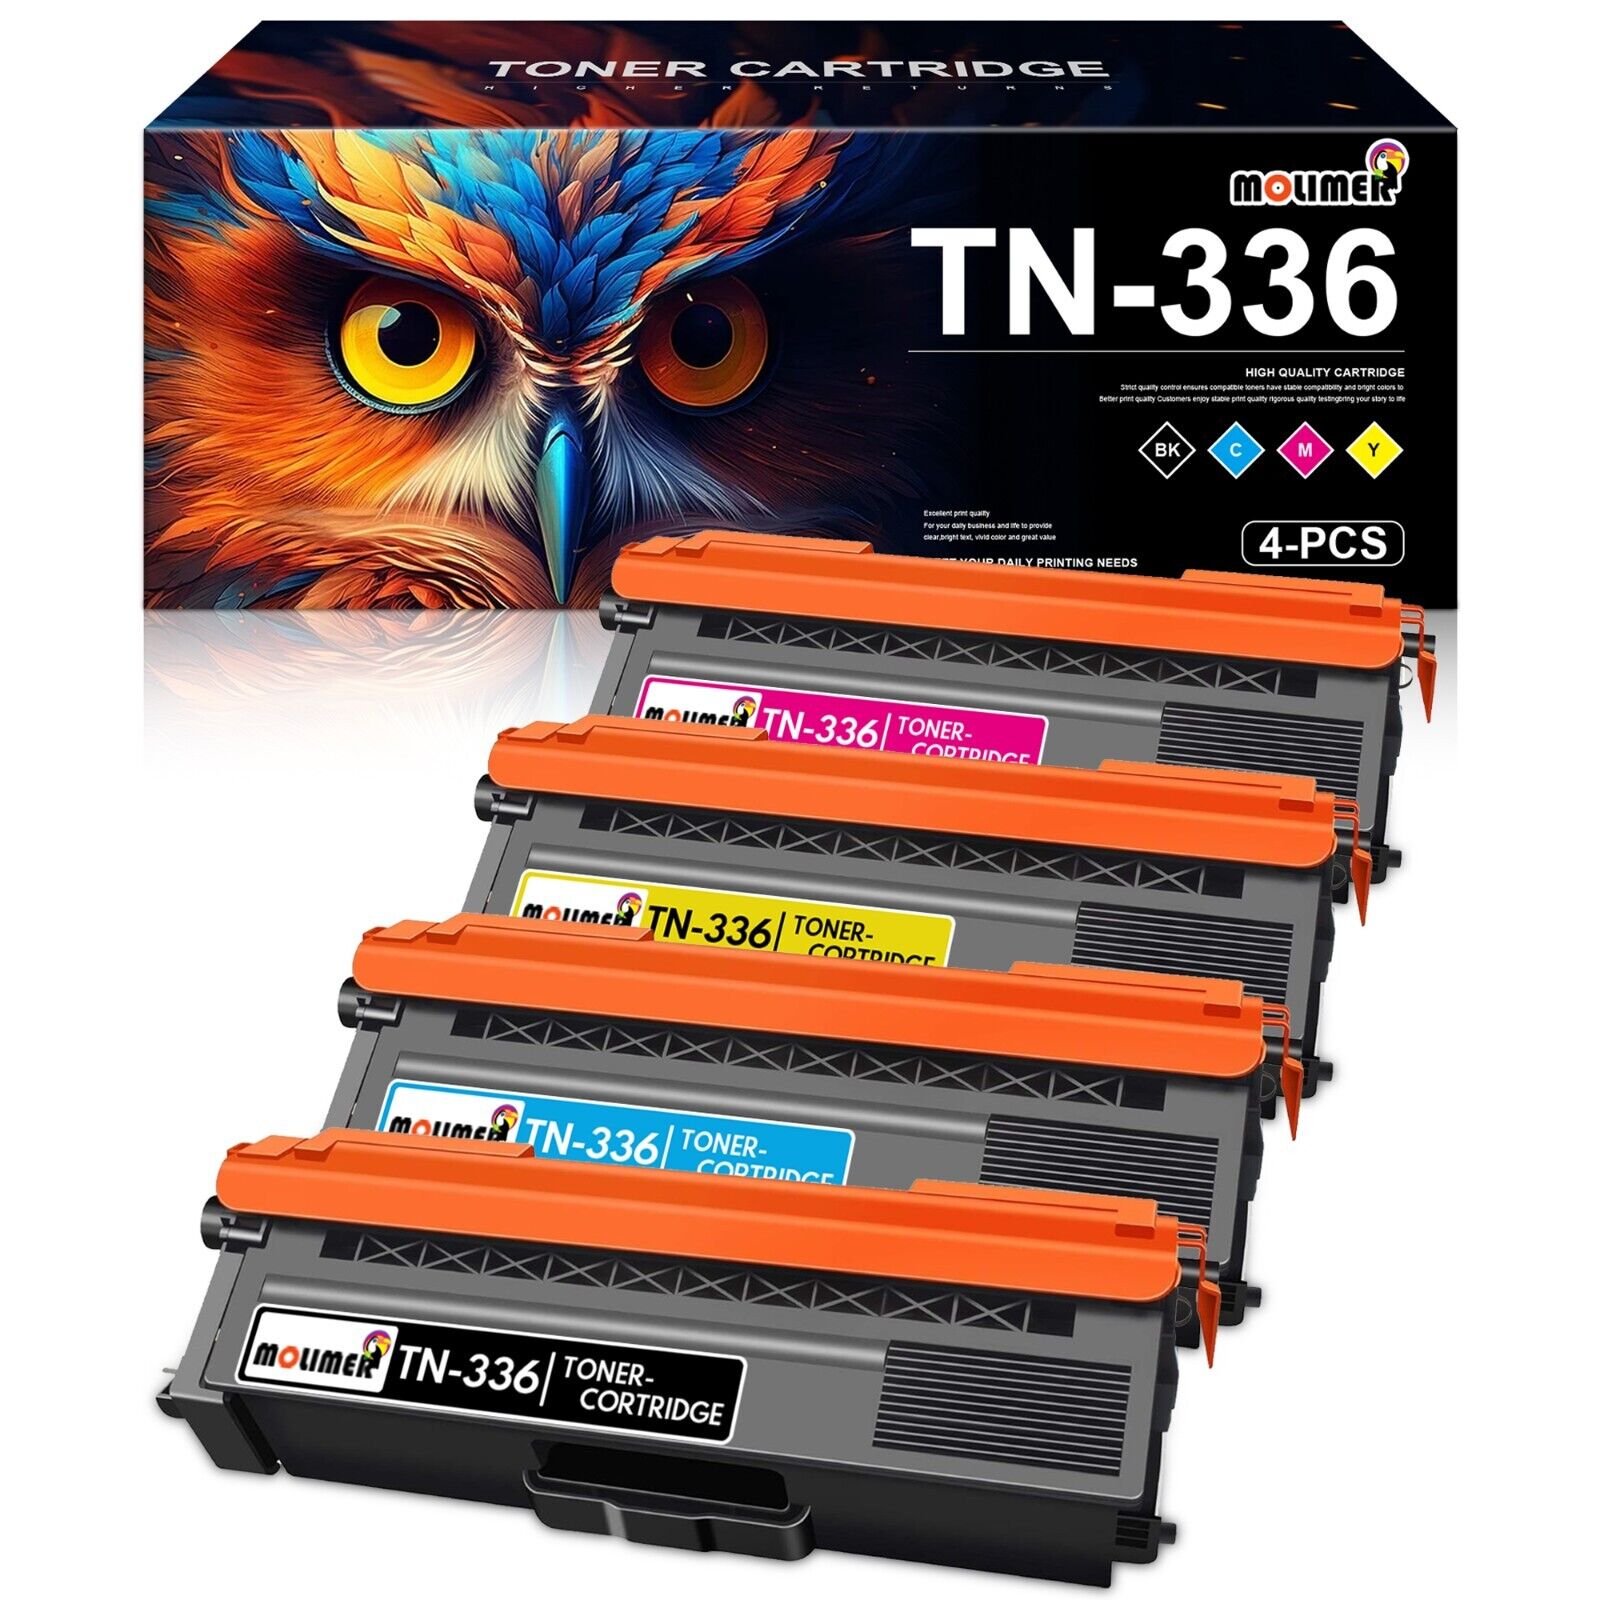 TN336 Toner High Yield Replacement for Brother TN336 MFC-L8600CDW 1BK/1C/1Y/1M